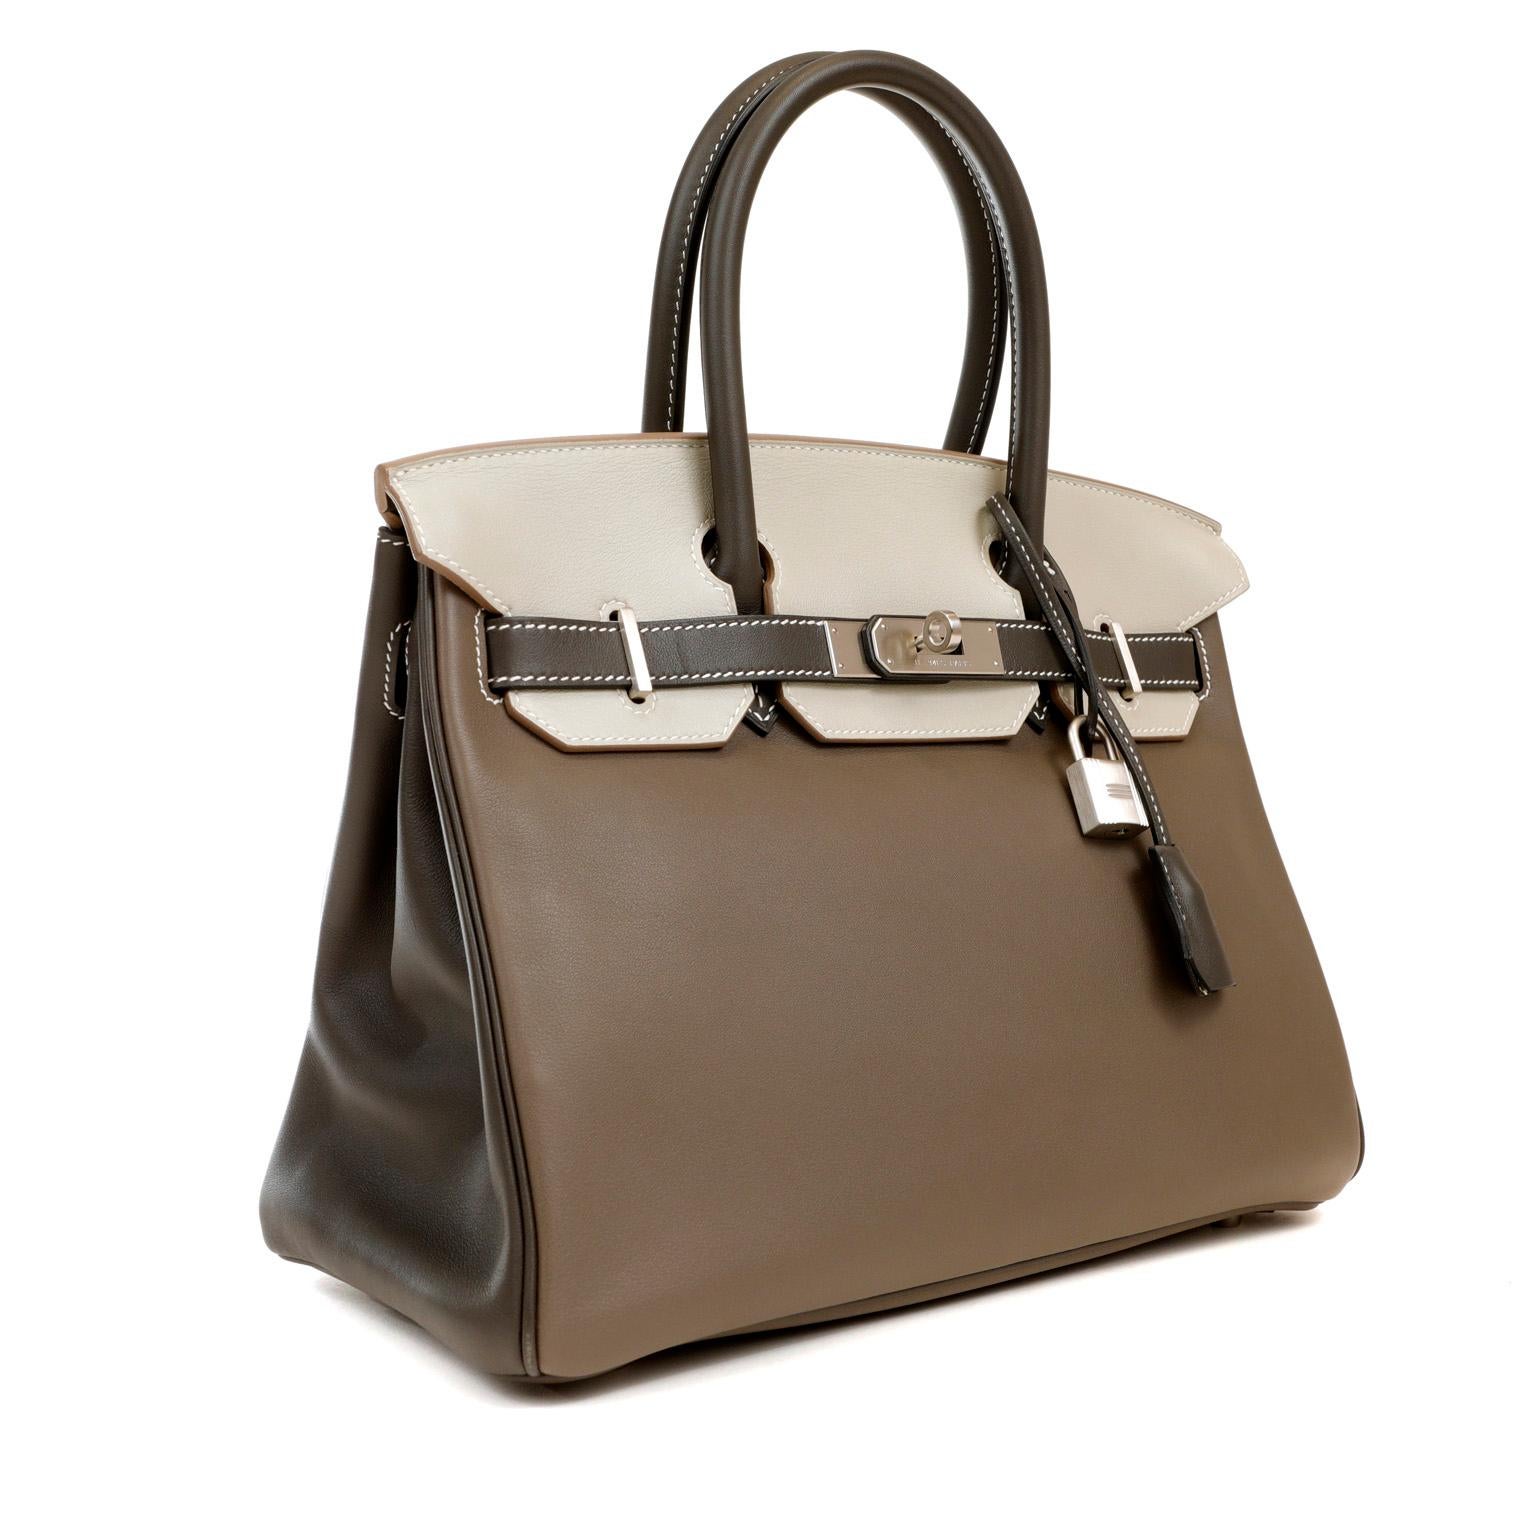 This authentic Hermès Tri Color Swift Leather 30 cm Birkin is in excellent condition. 
Long waitlists are commonplace for the intensely coveted classic leather Birkin bag.  Each piece is hand crafted by skilled artisans and represents the epitome of